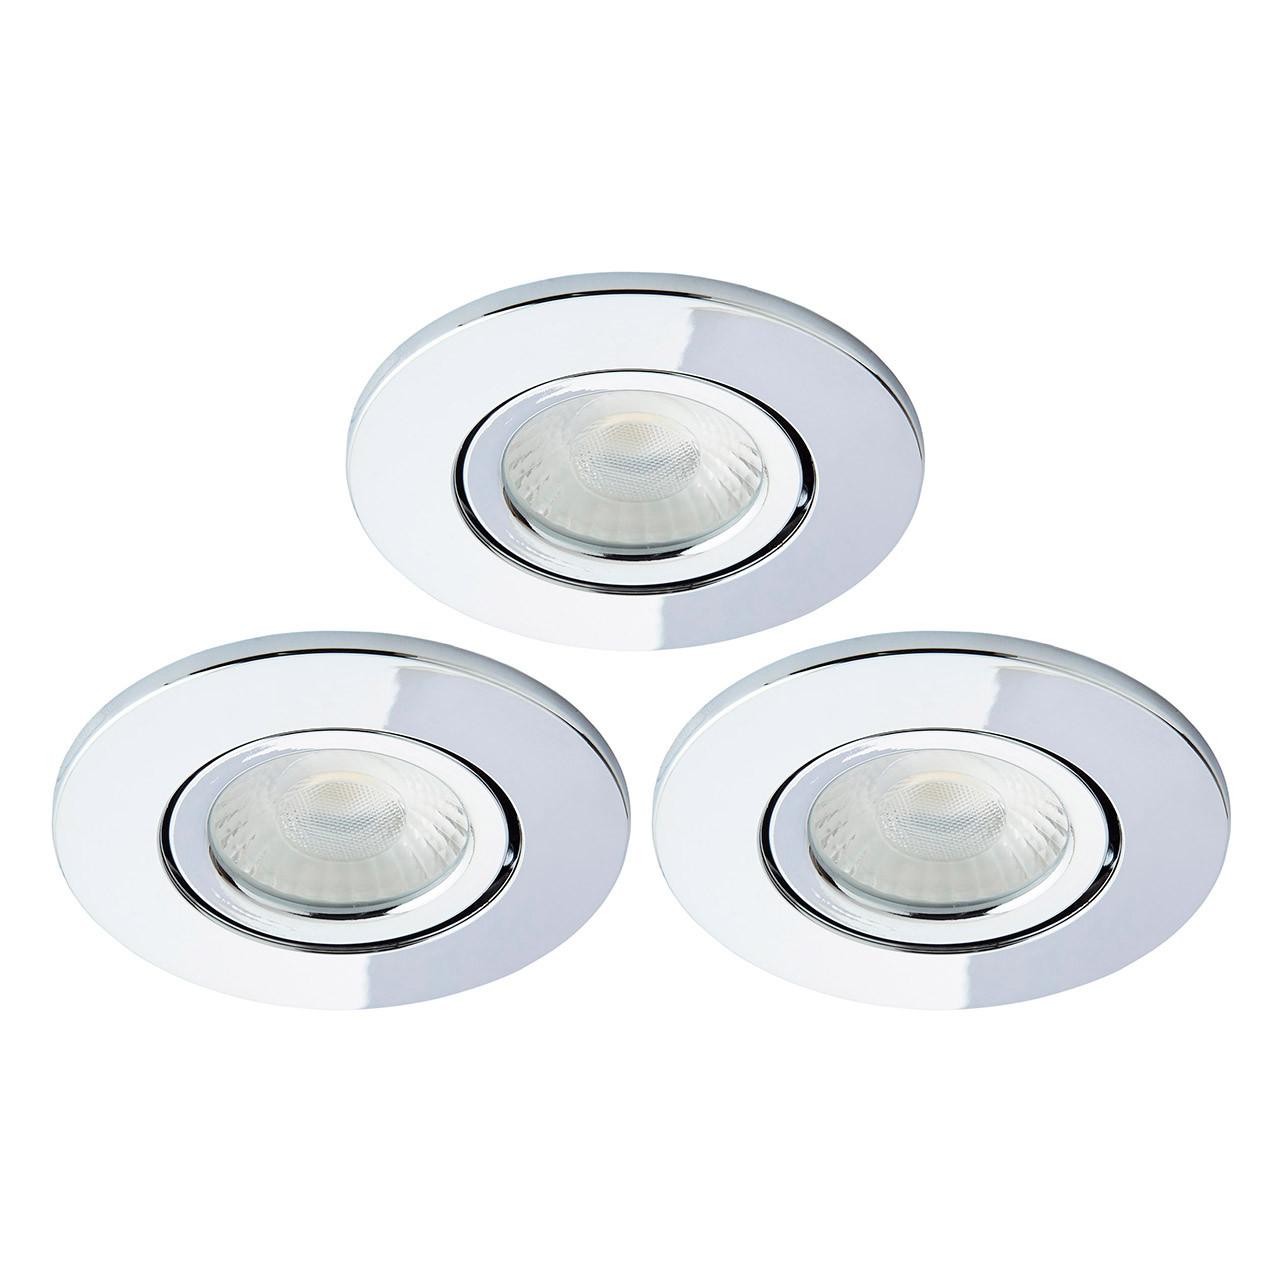 Photos - Chandelier / Lamp SPA Como LED Tiltable Fire Rated Downlight 5W Dimmable 3-Pack Cool White C 